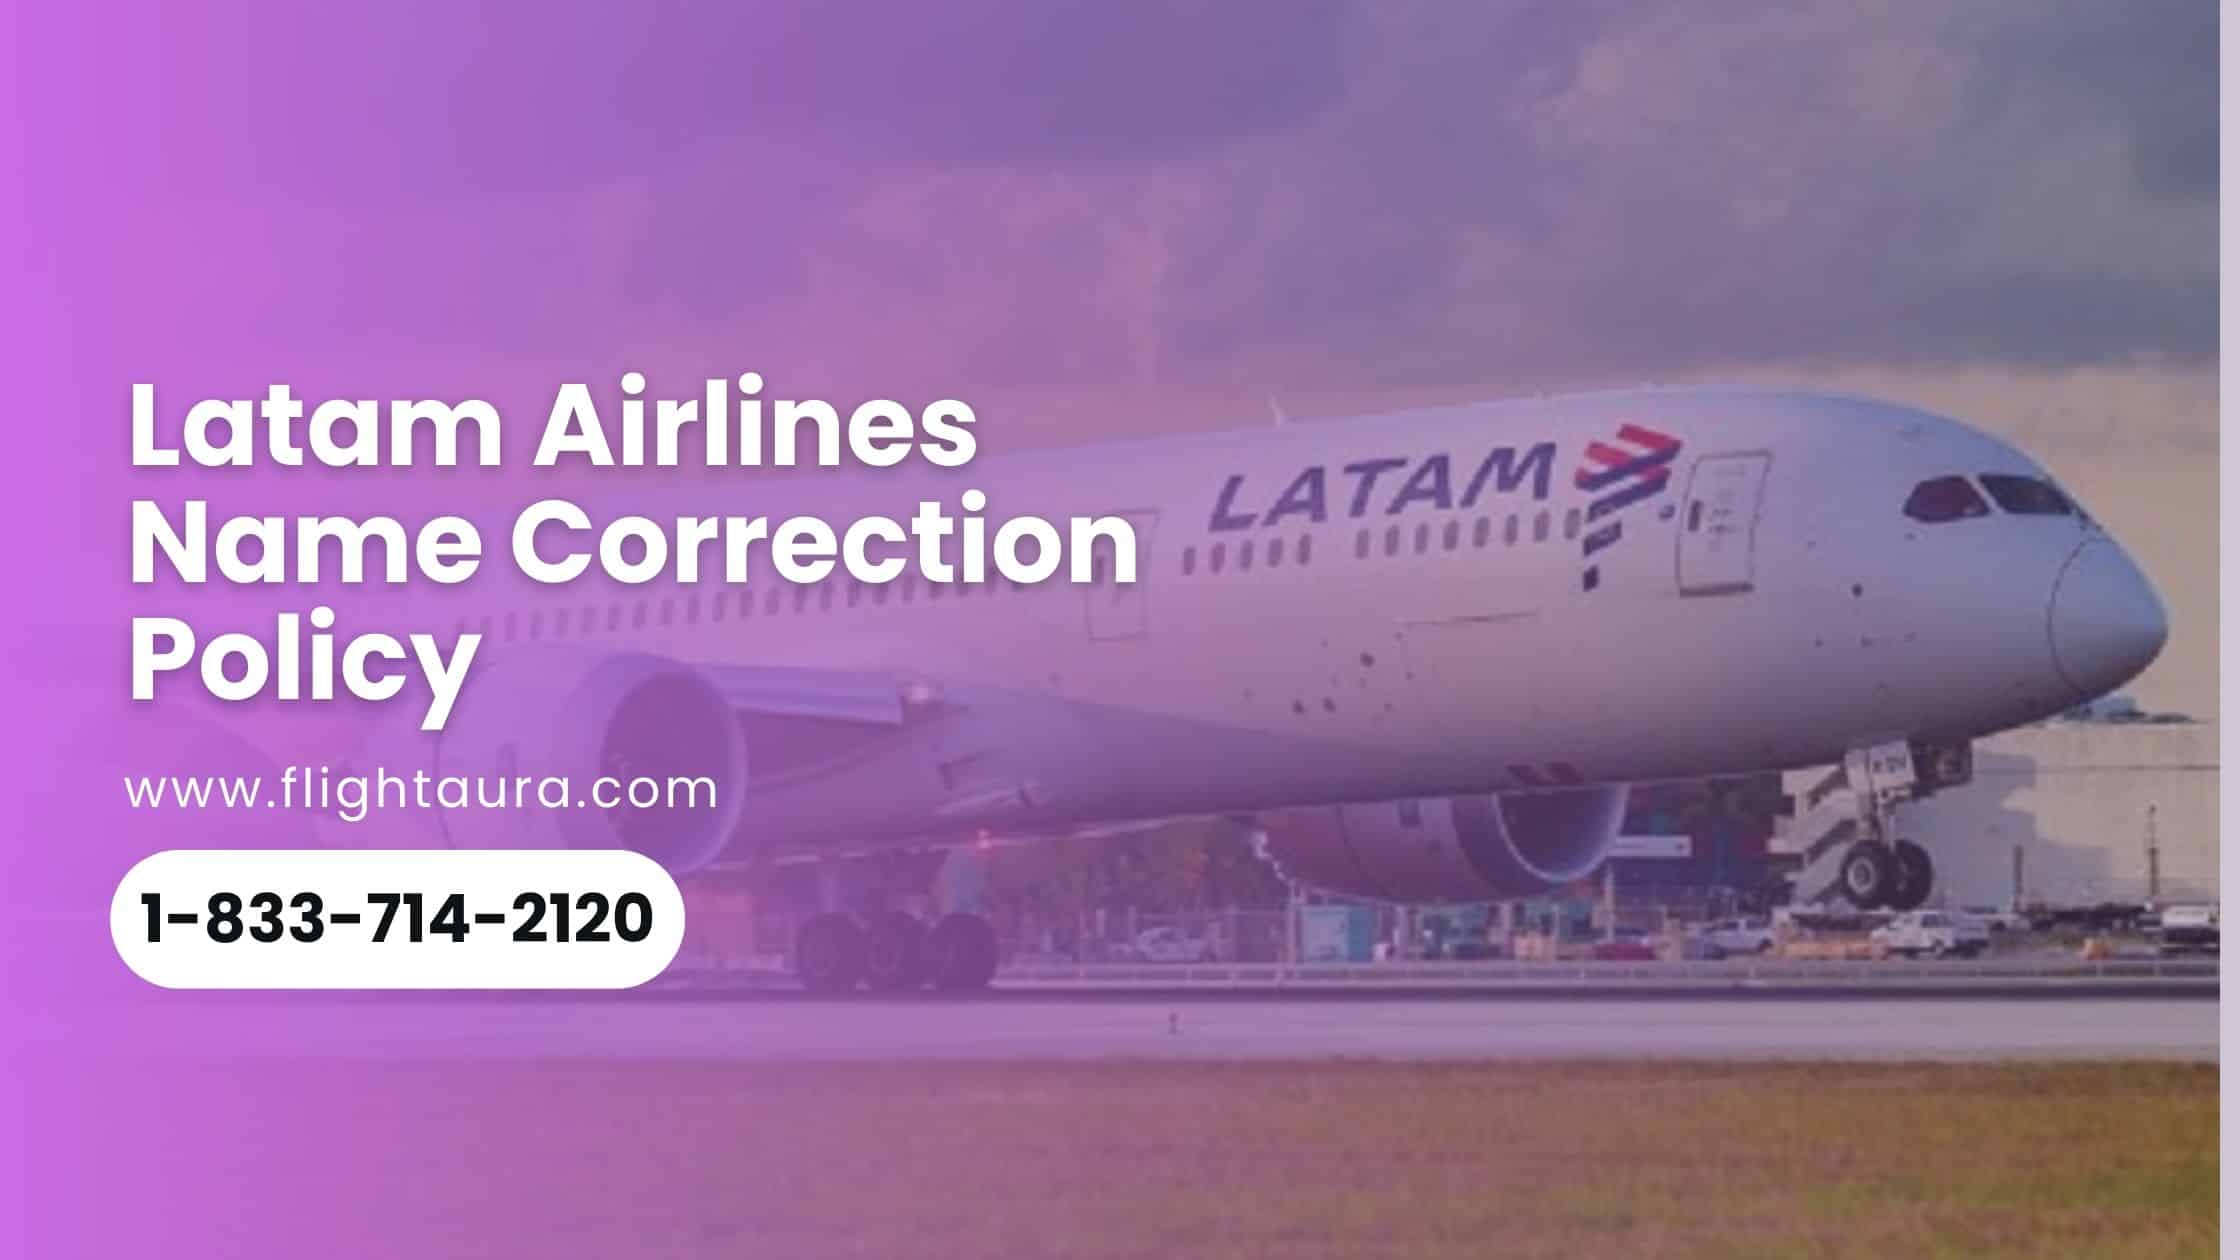 Latam Airlines Name Change Policy